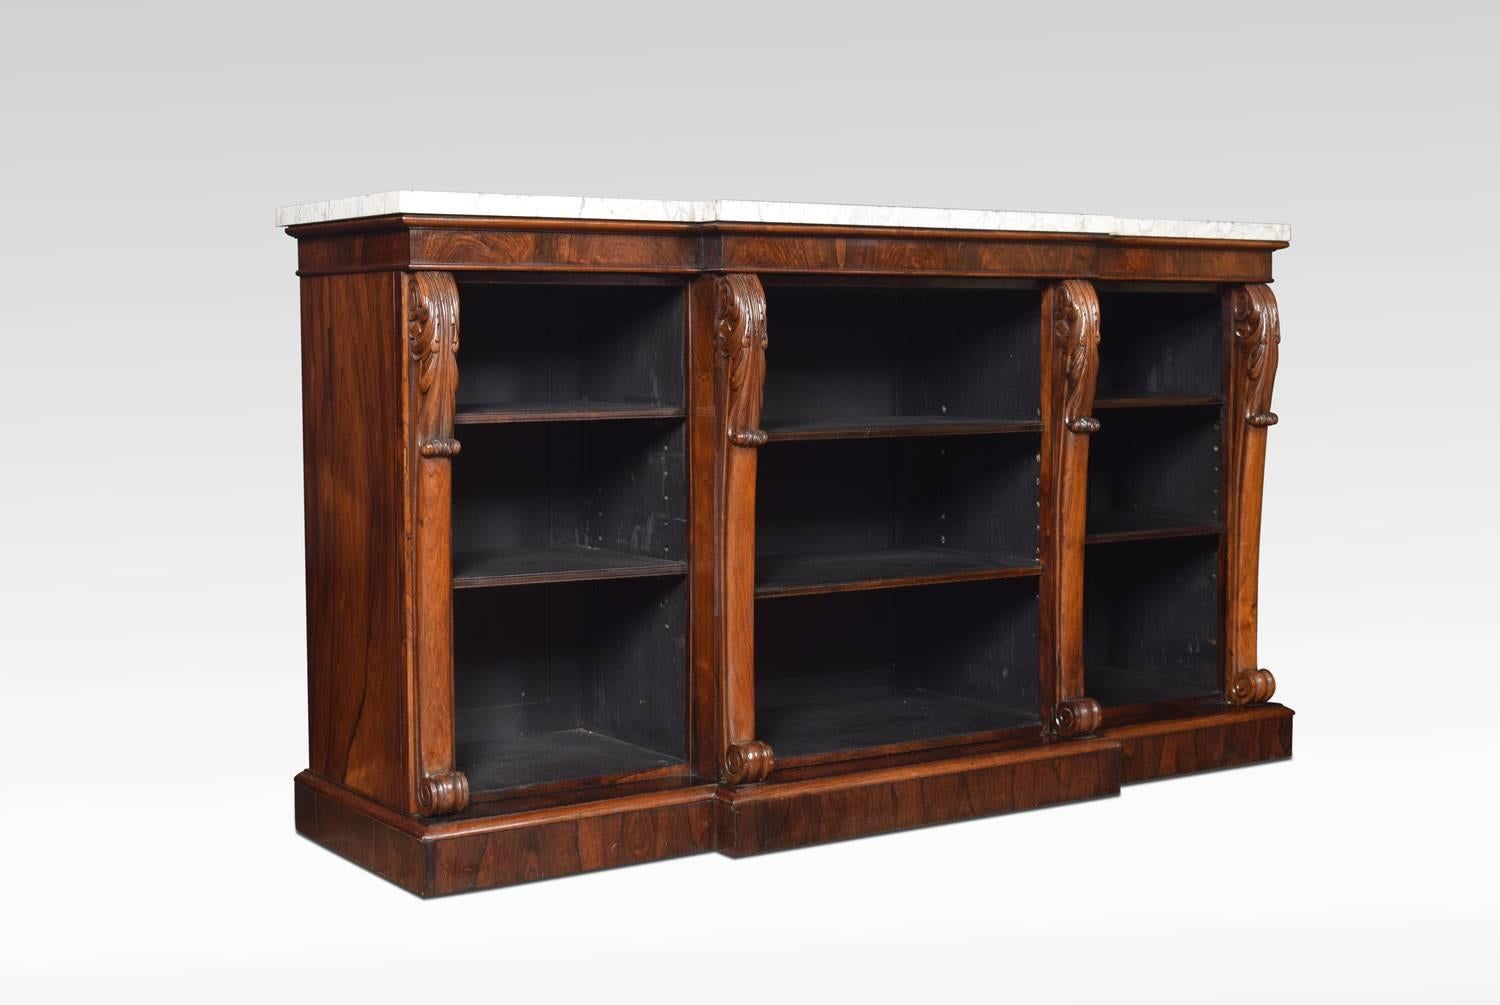 Regency rosewood open bookcase, the large rectangular breakfront white veined marble top above three bays of adjustable shelves flanked by carved scrolling columns. All raised up on plinth base.
Dimensions:
Height 37.5 inches
Width 67